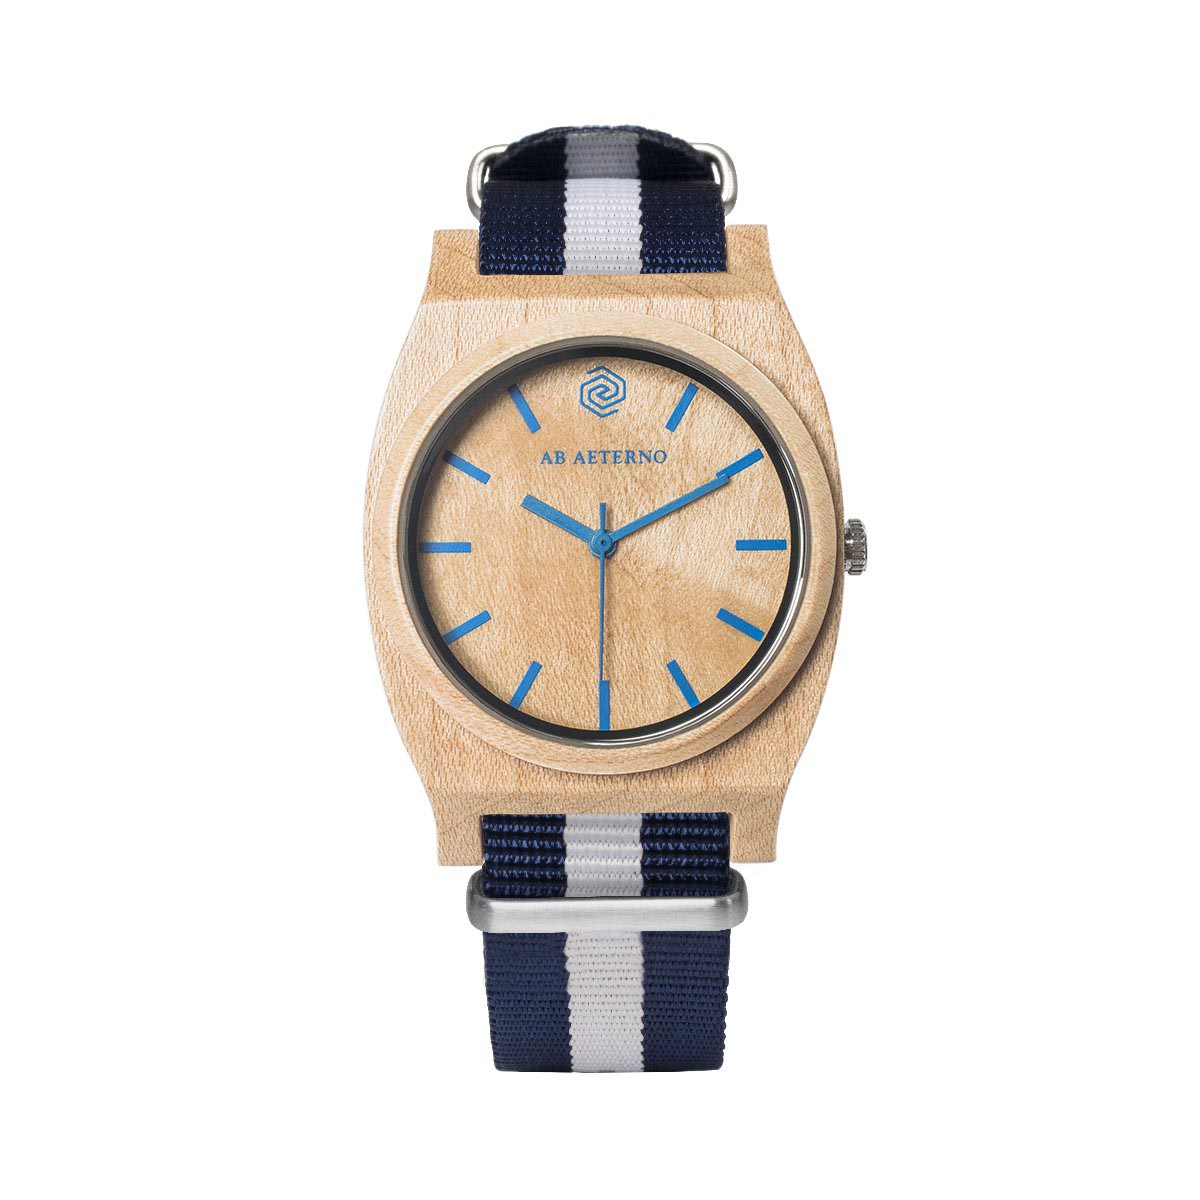 orologio__0005_ab-aeterno-watches-1200px-horizon-collection-route-blue-blue-white-1